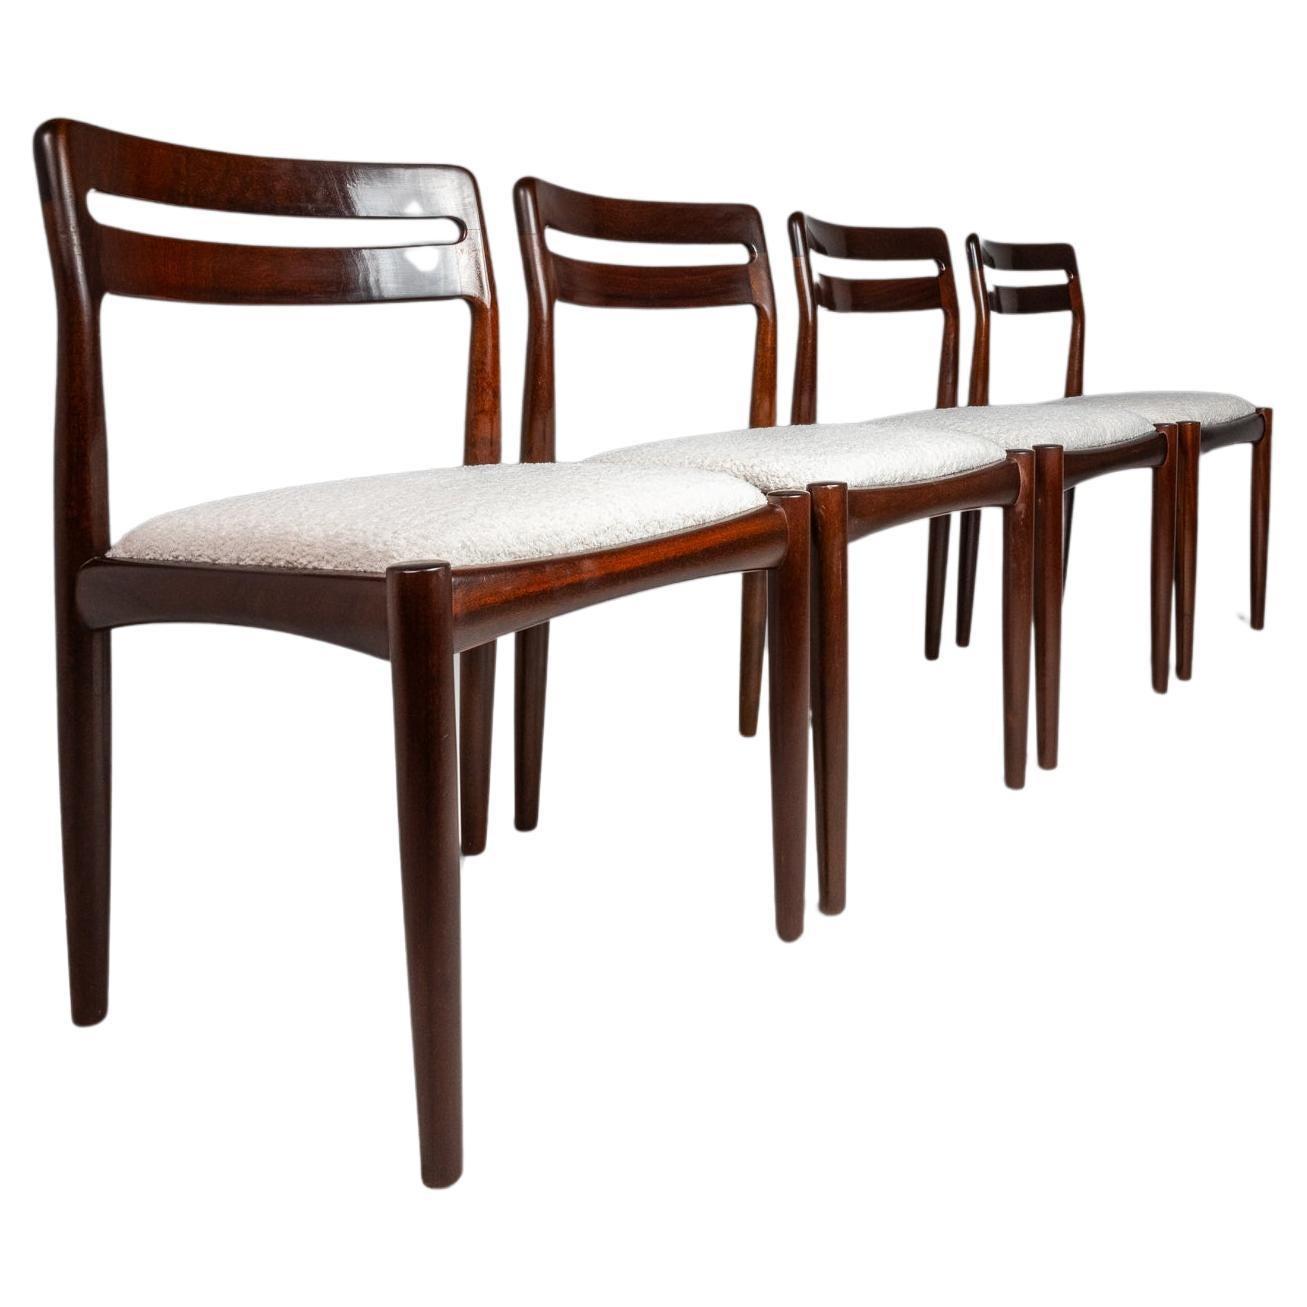 Set of 4 Model 382 Dining Chairs in Mahogany by H.W. Klein, Denmark, c. 1960s For Sale